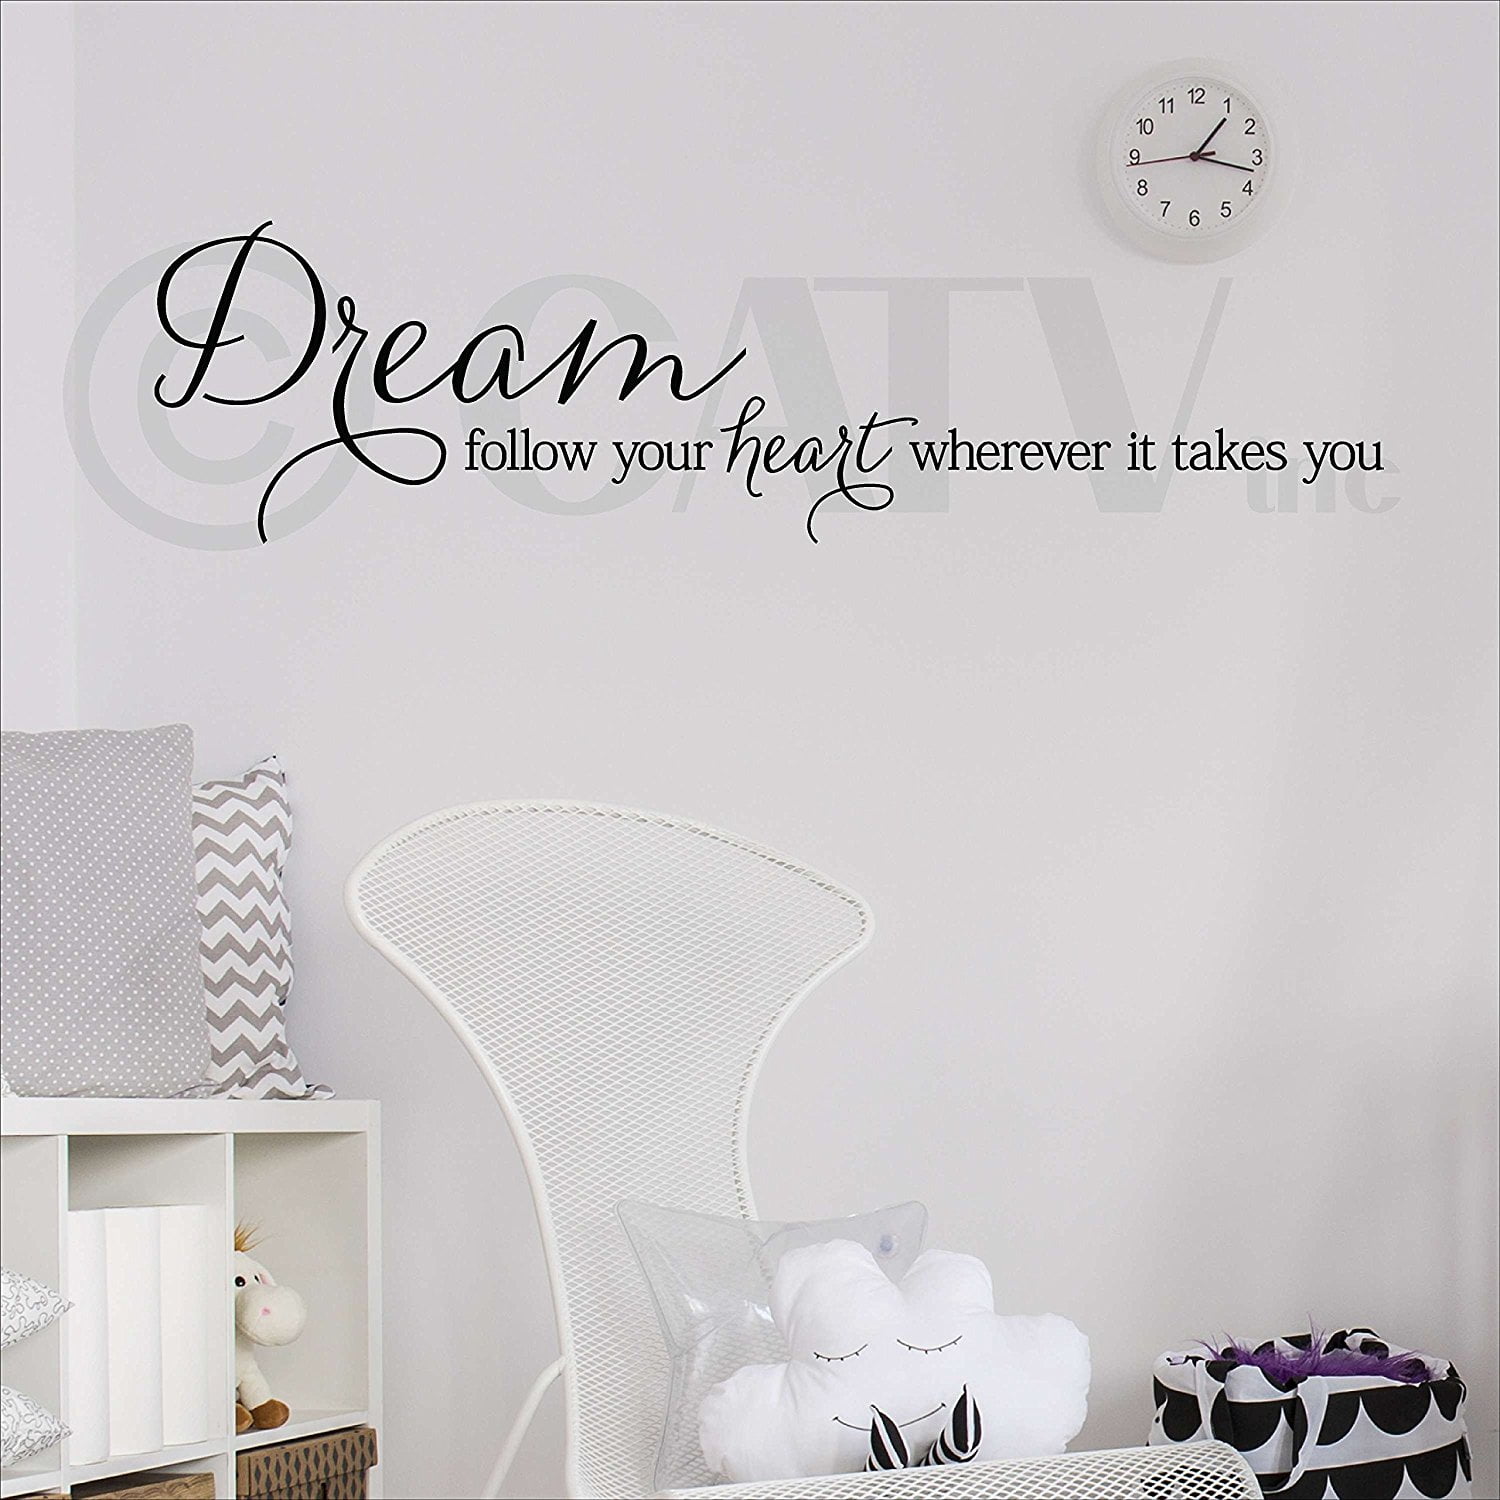 Wall Decal Quote Sticker Vinyl Lettering Graphic Follow Your Heart Dream IN86